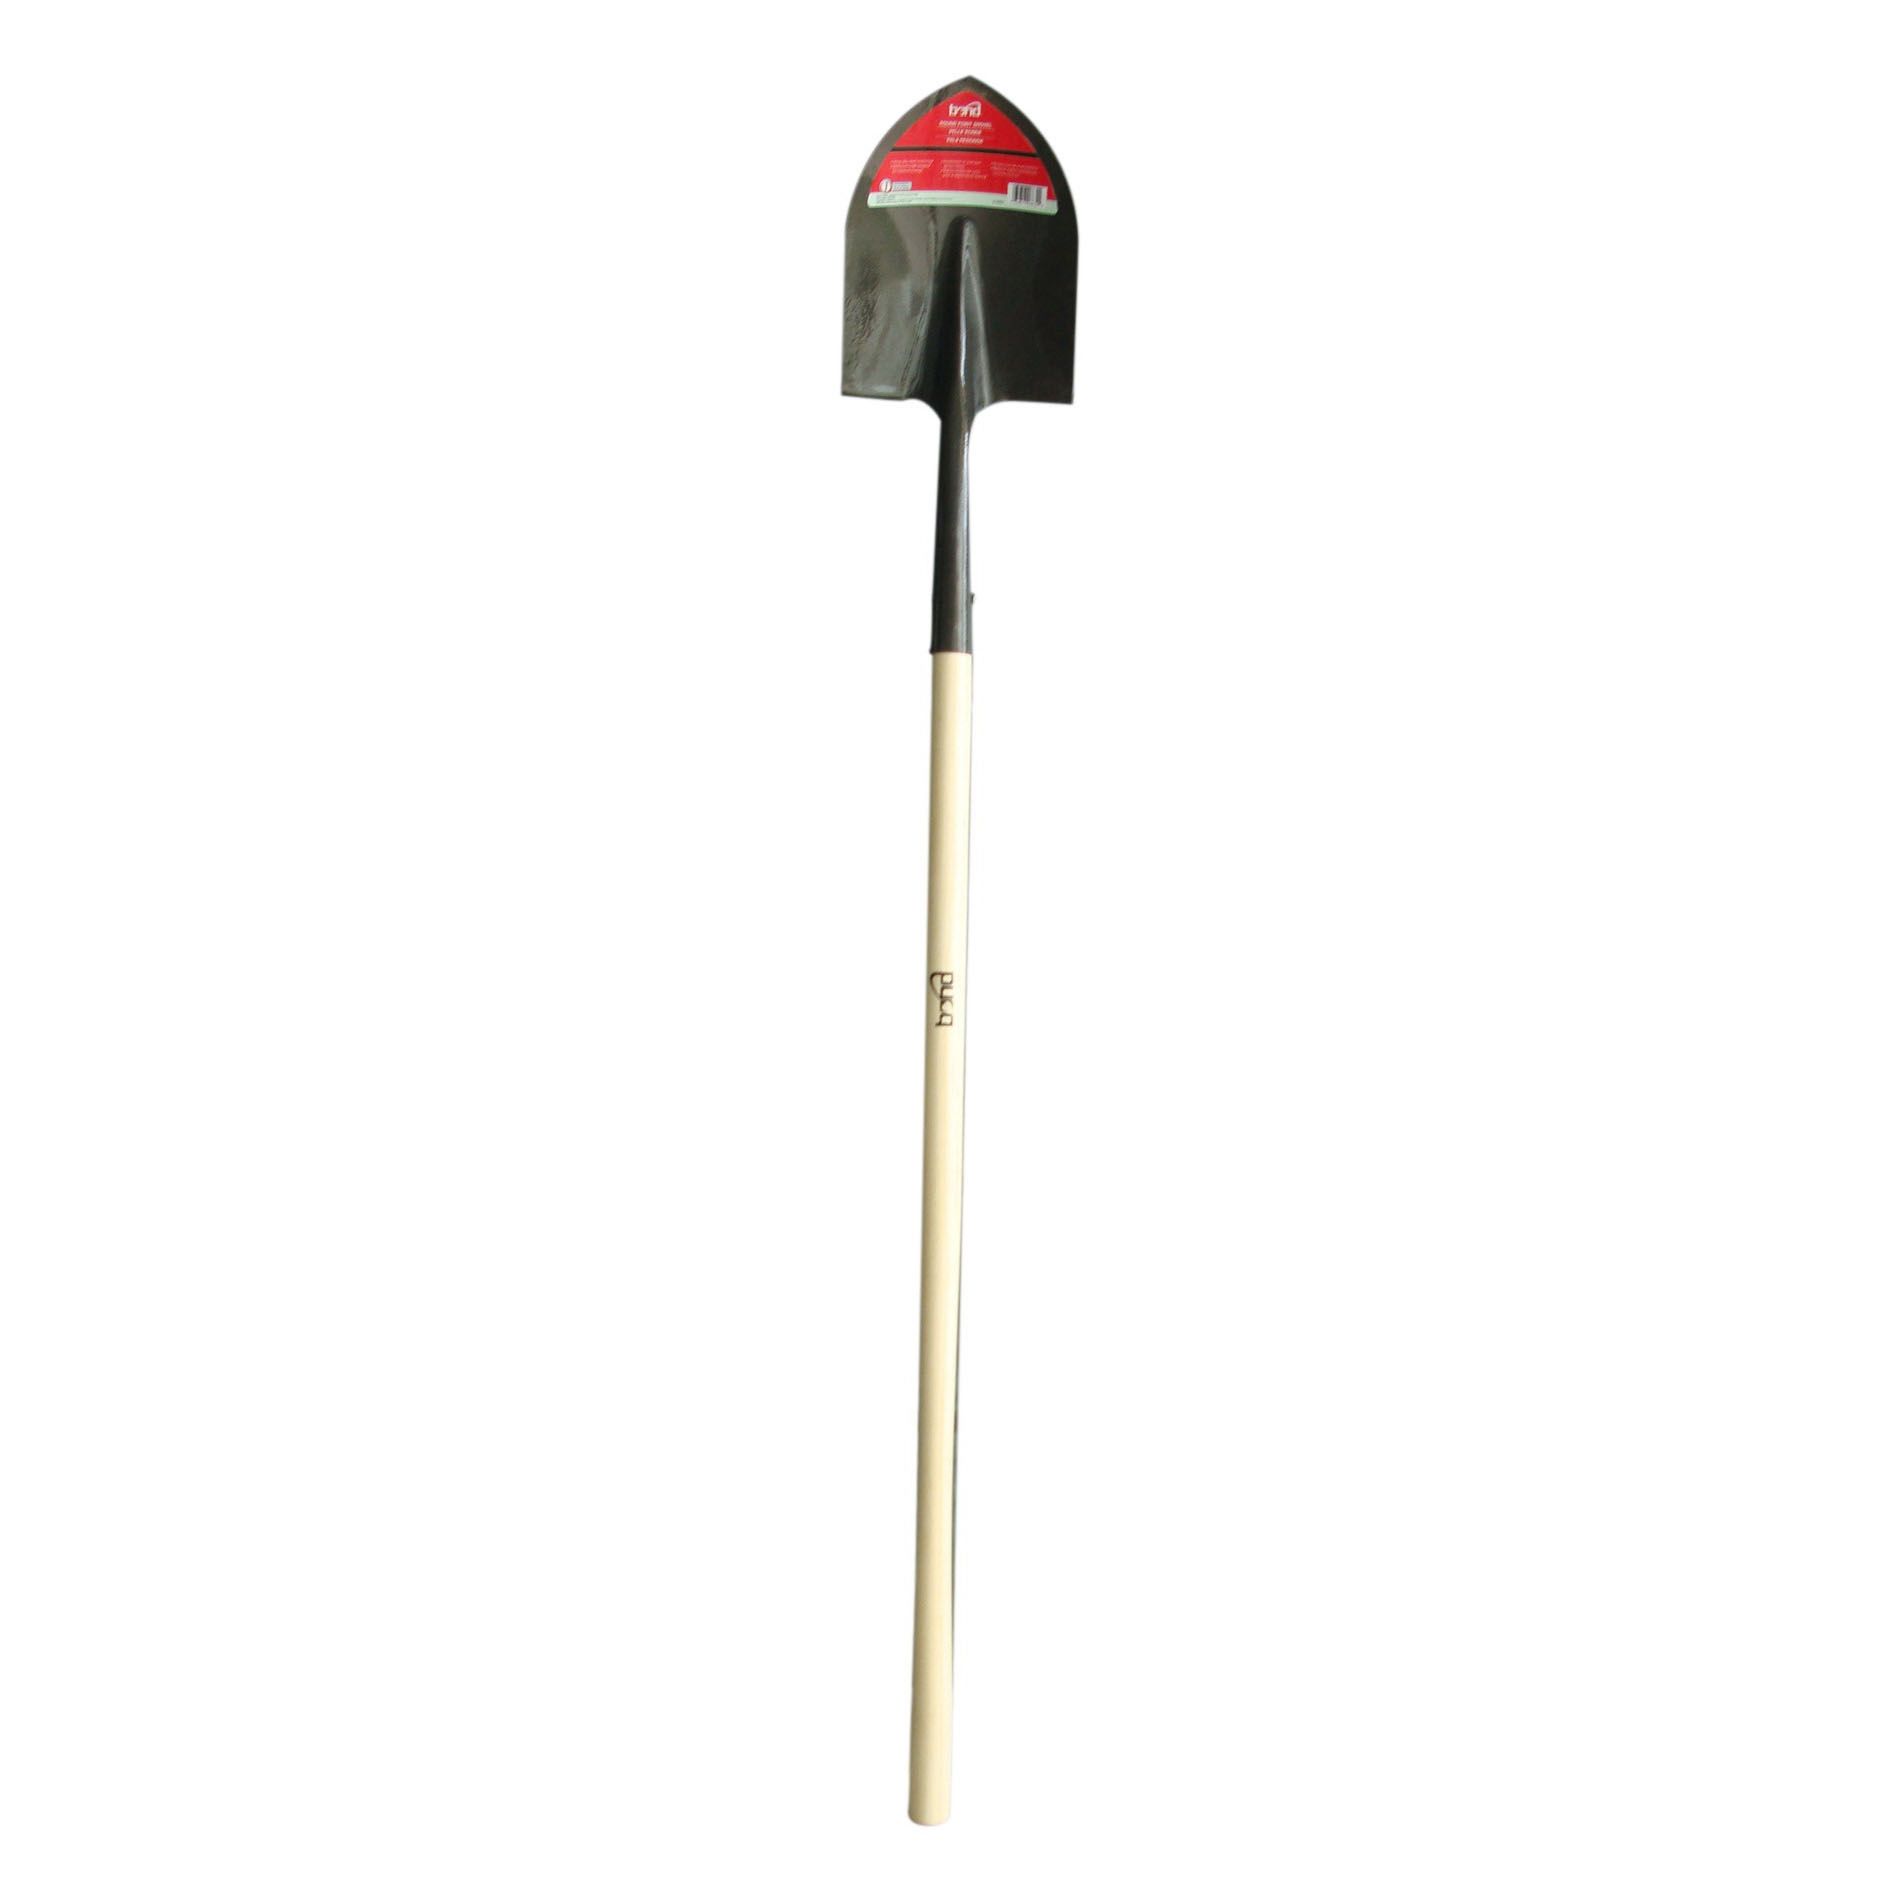 Buy this Round Point Steel Shovel at kmart - with in-store pickup